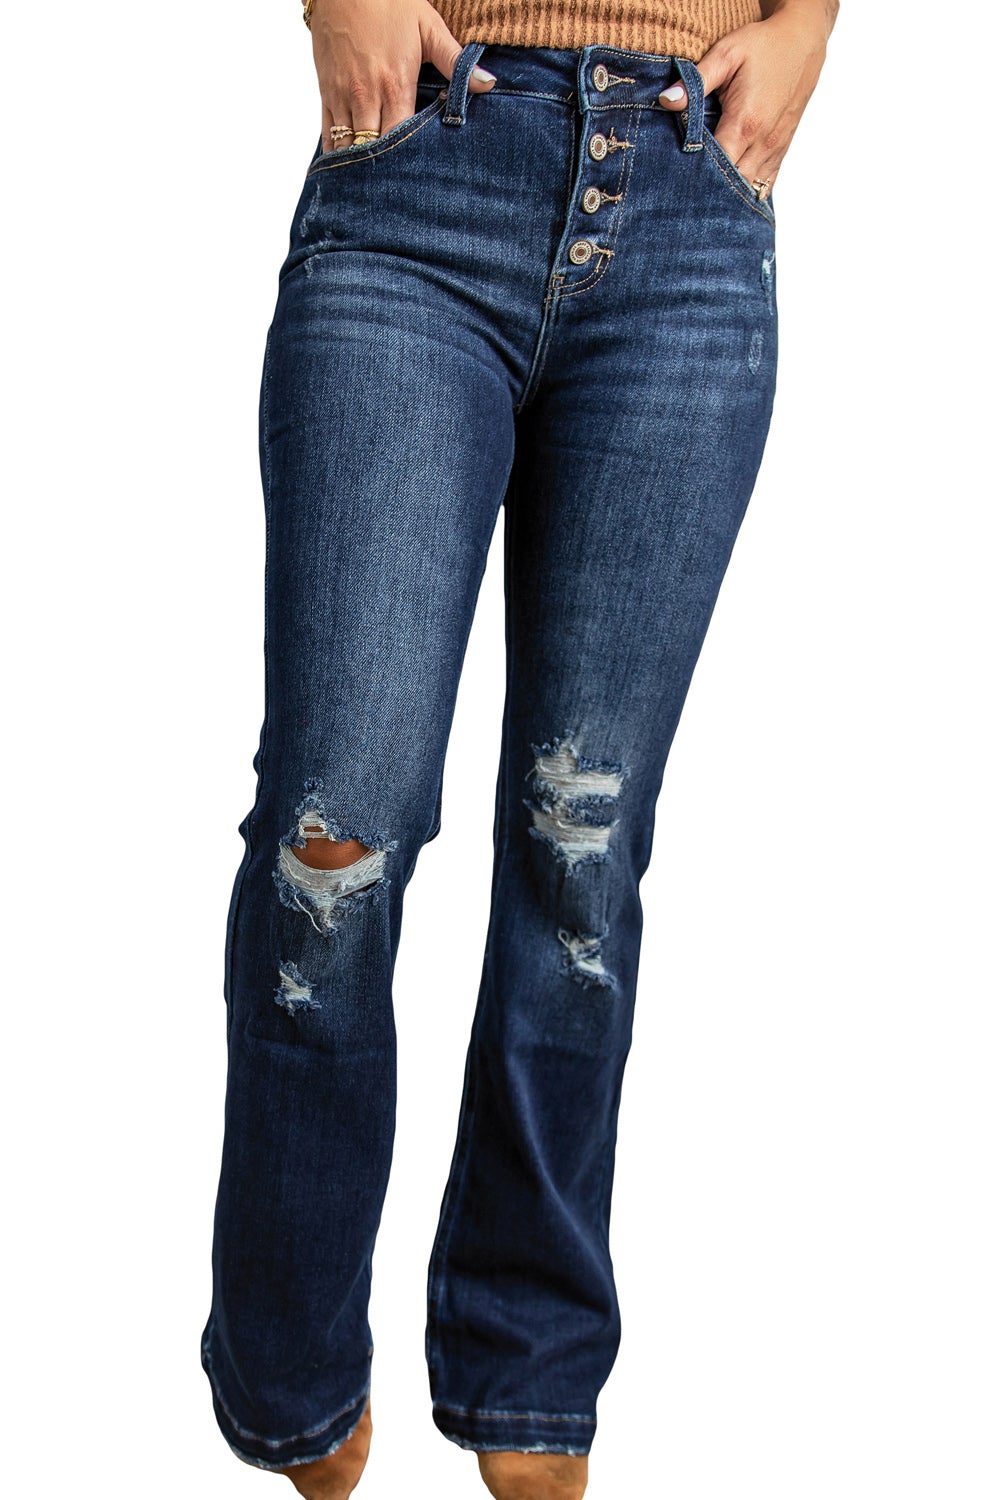 Distressed Flare Bottom Jeans